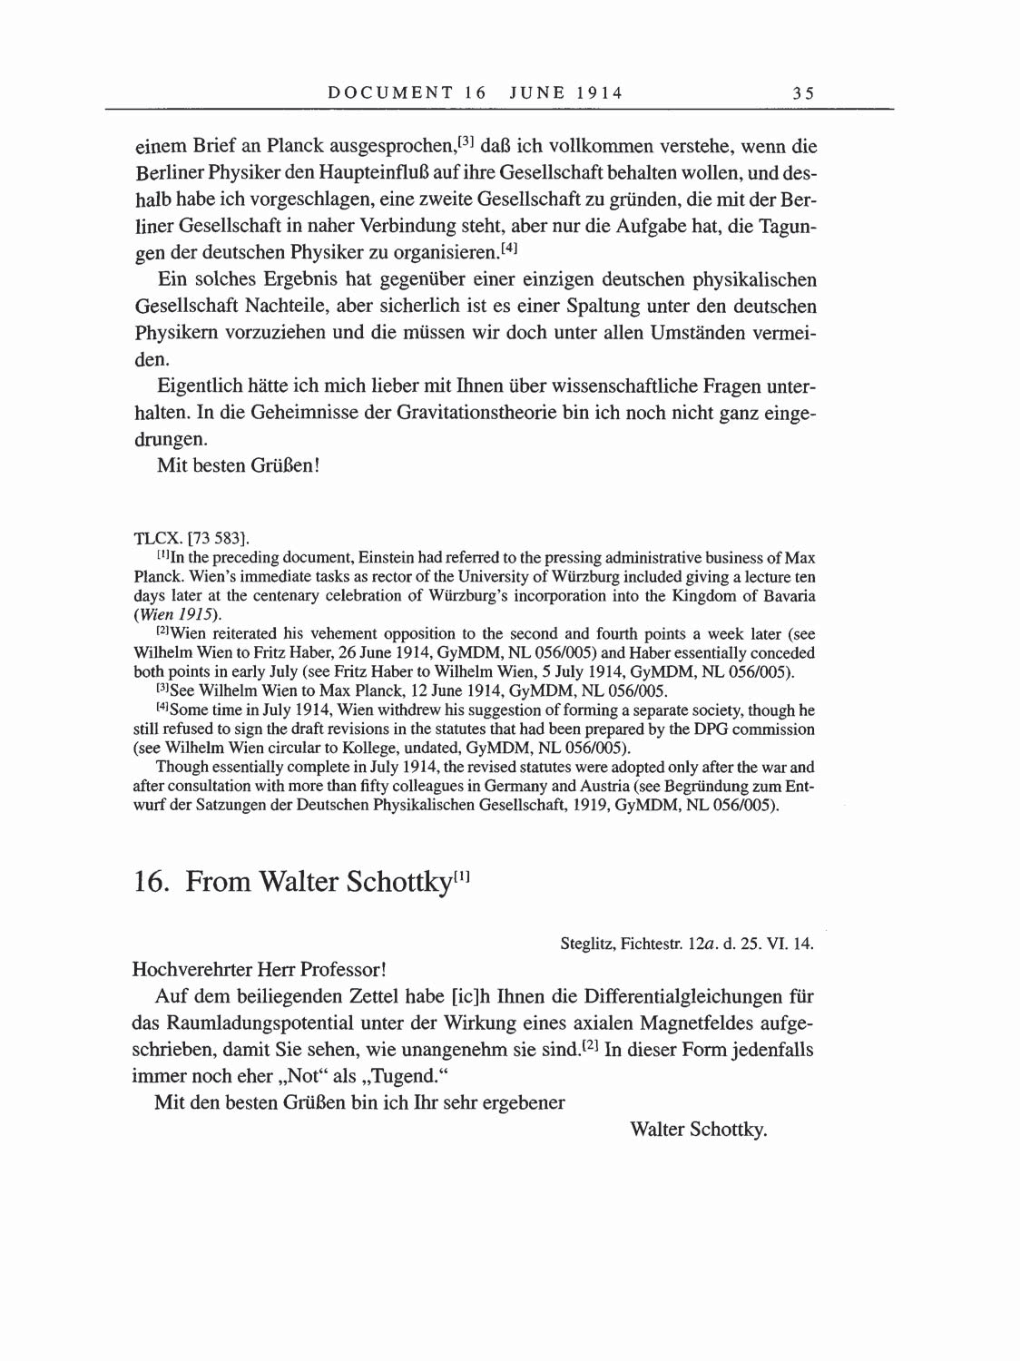 Volume 8, Part A: The Berlin Years: Correspondence 1914-1917 page 35